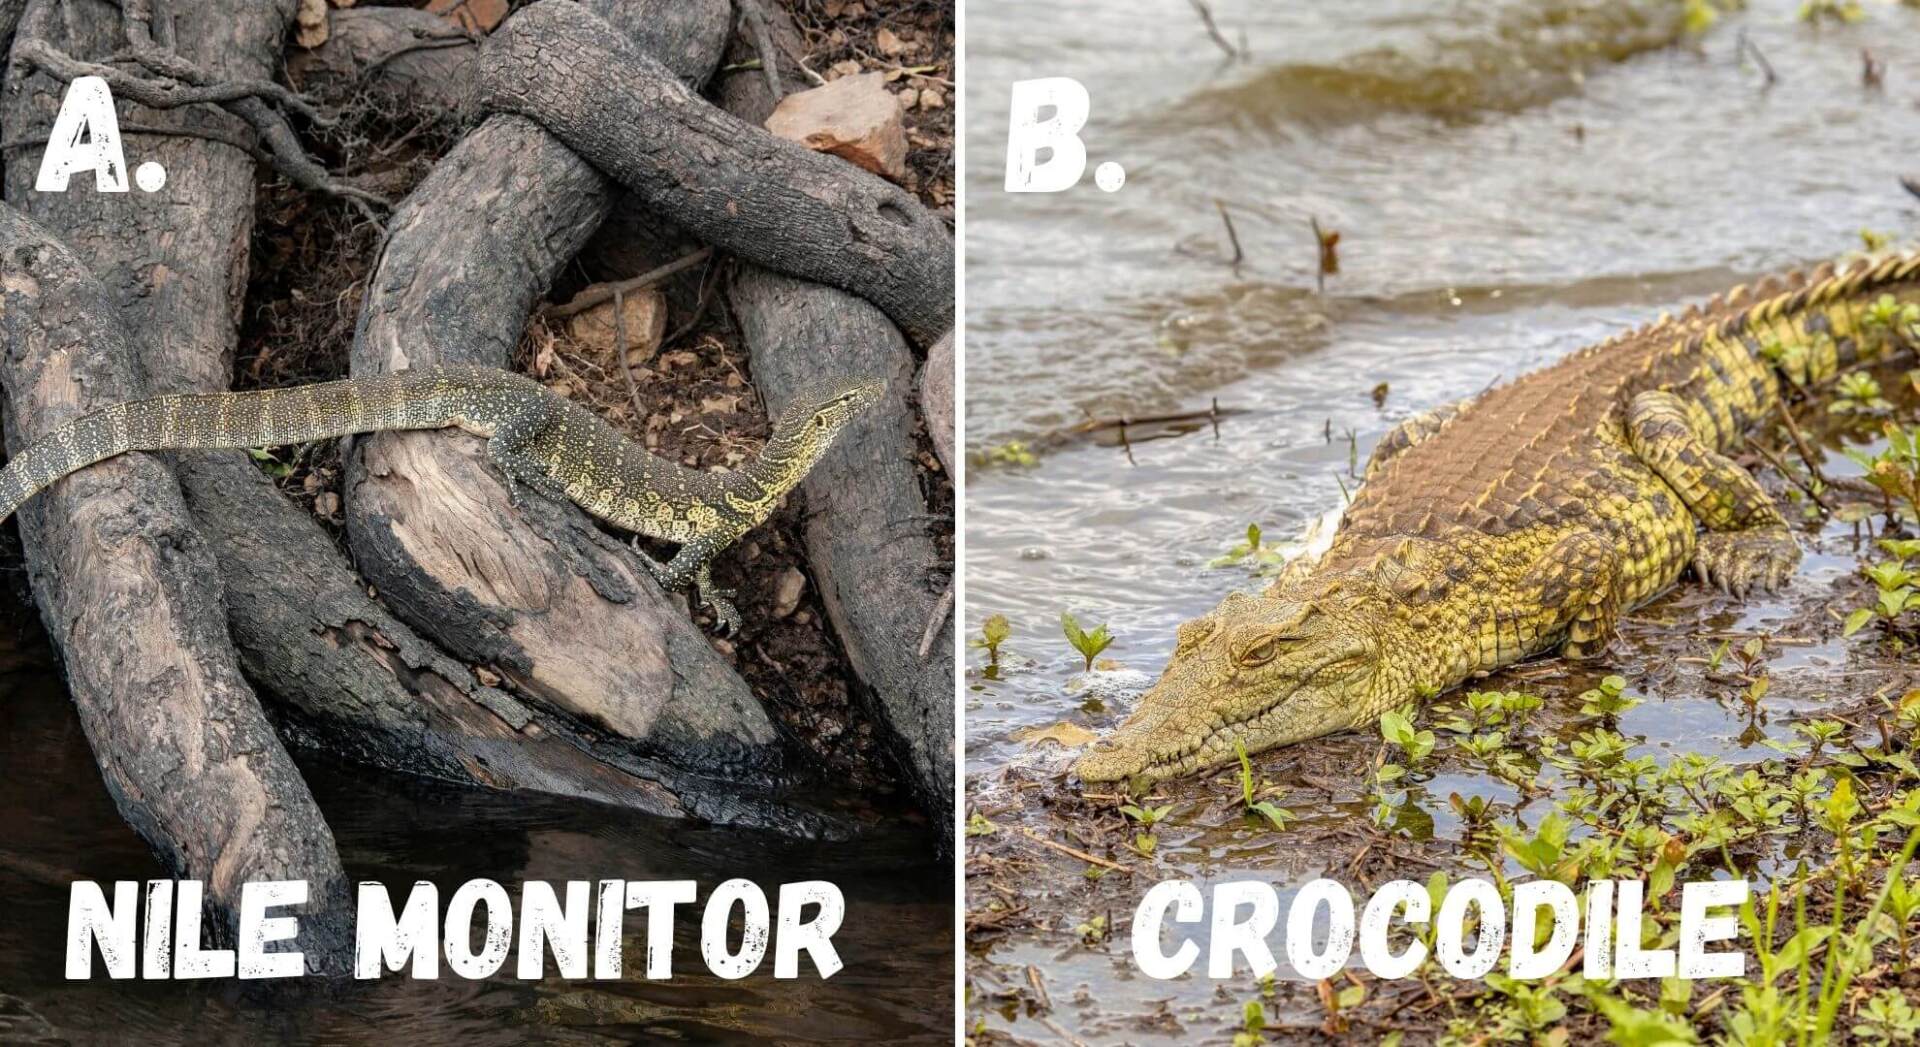 nile crocodiles are the apex predator in their ecosystem and will feed on small reptiles like the nile monitor